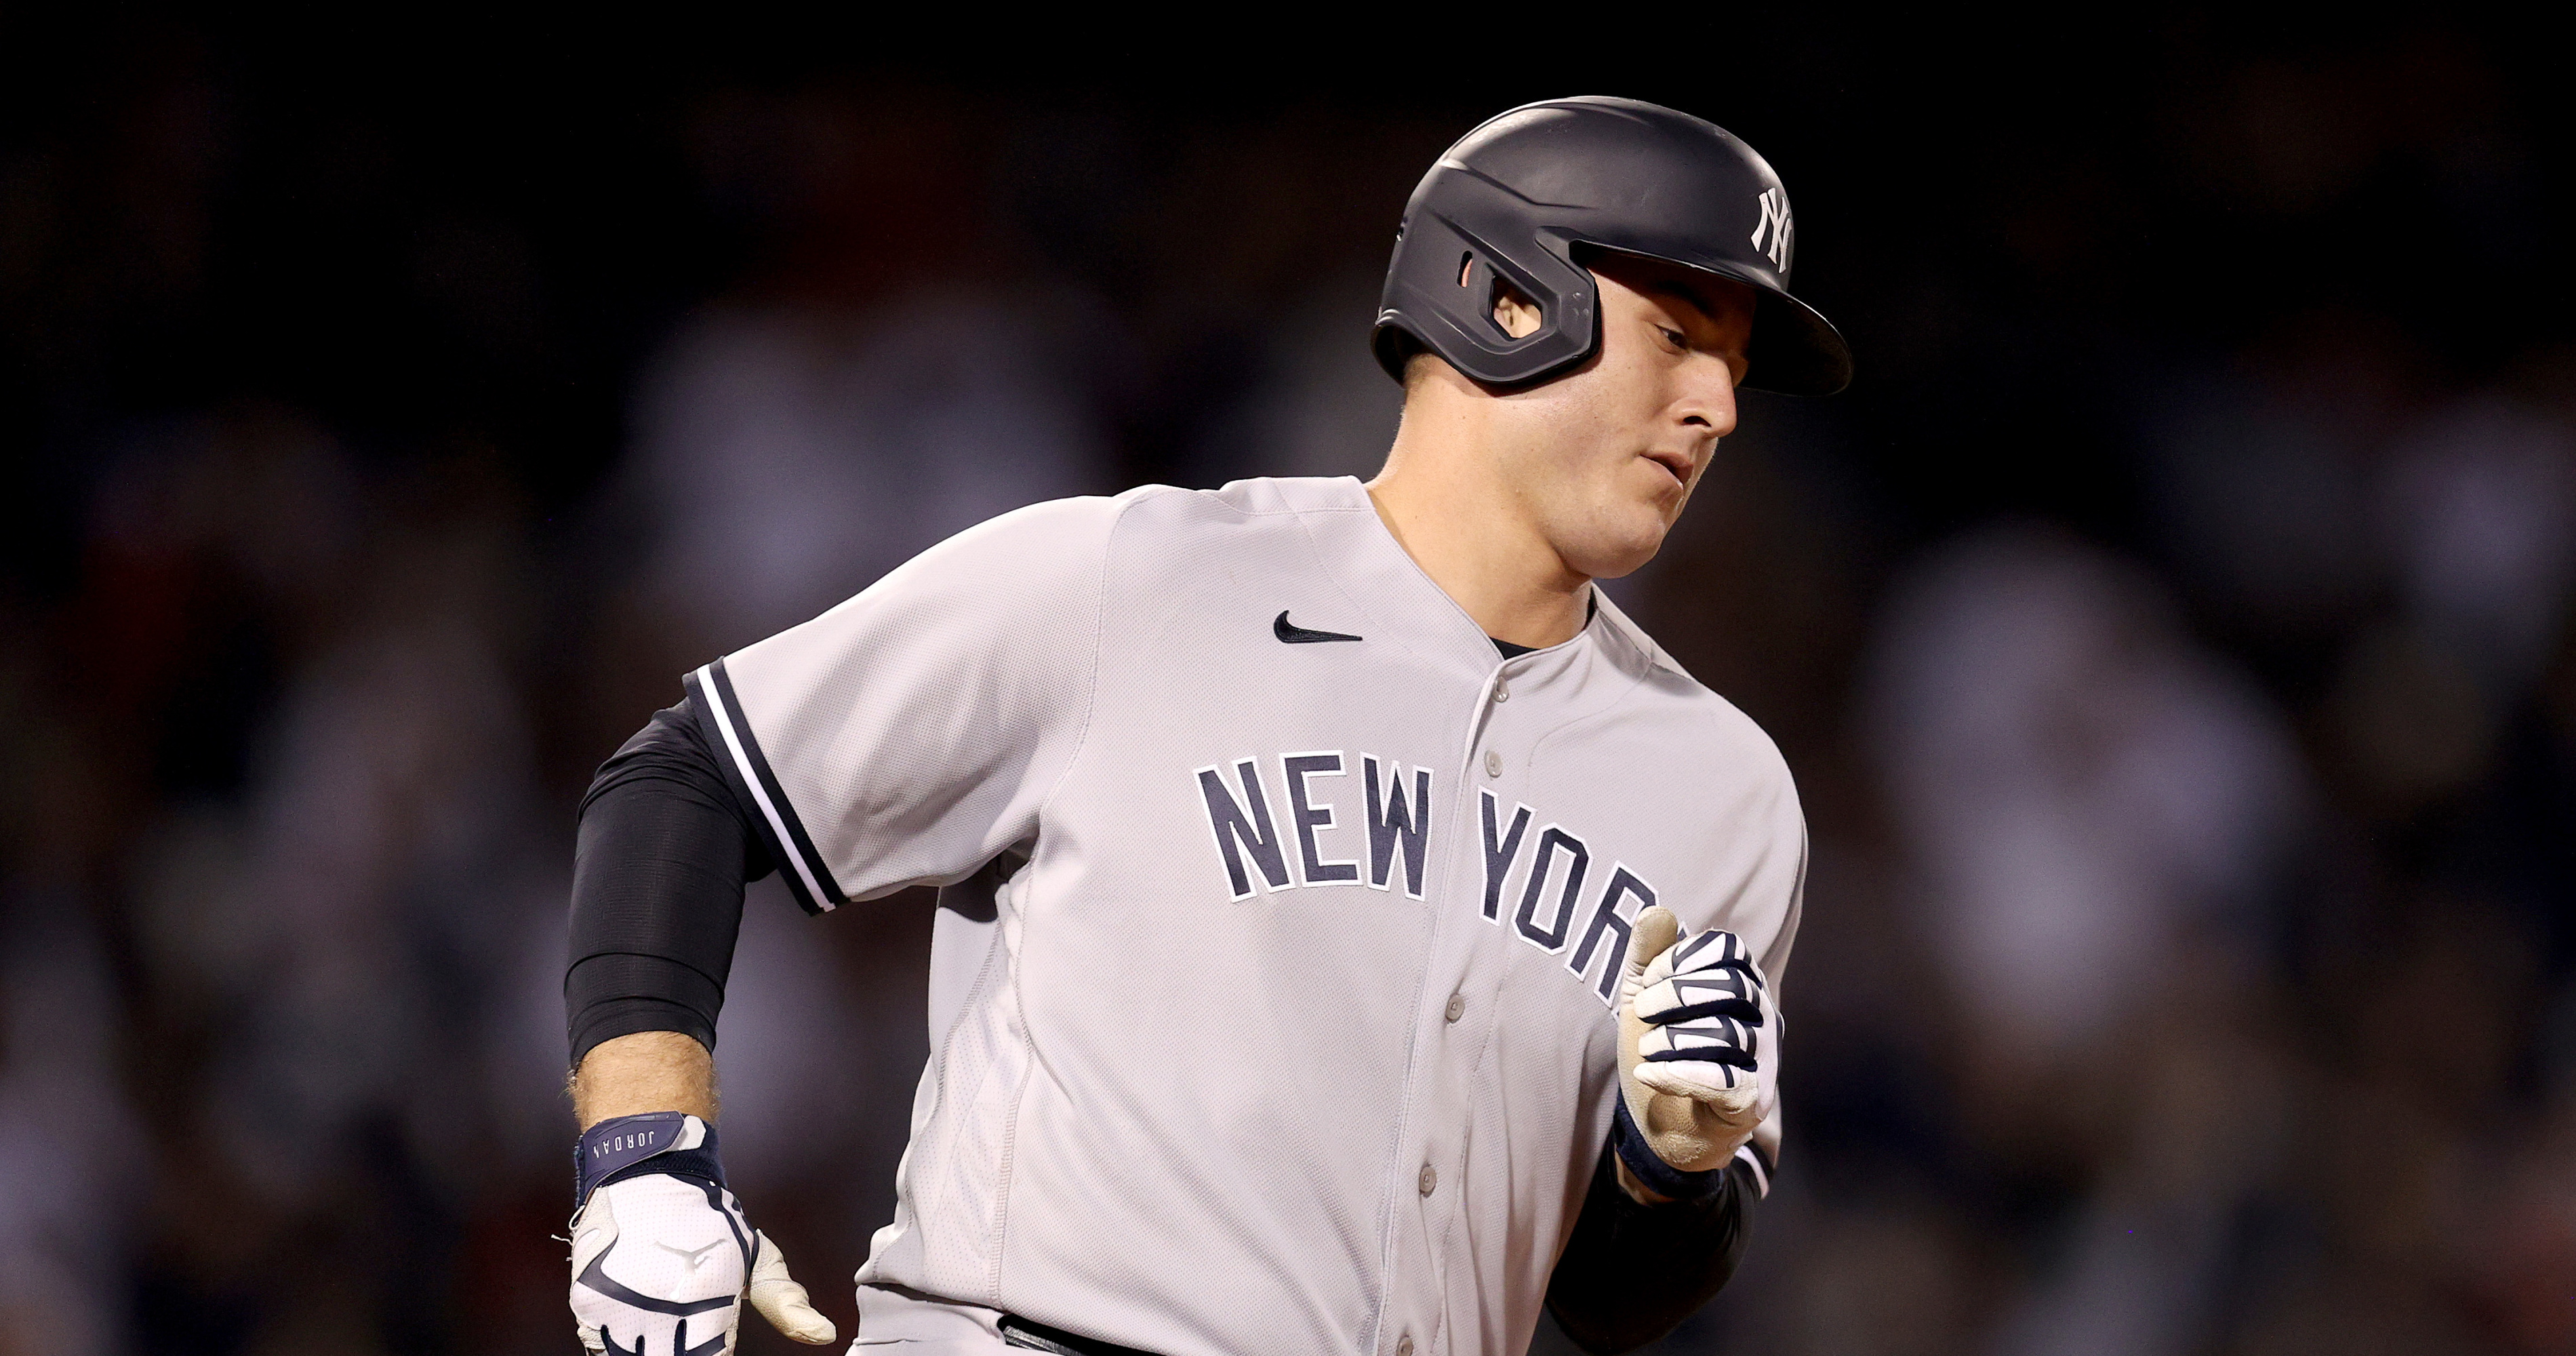 Anthony Rizzo's concussion affair is malpractice by the Yankees